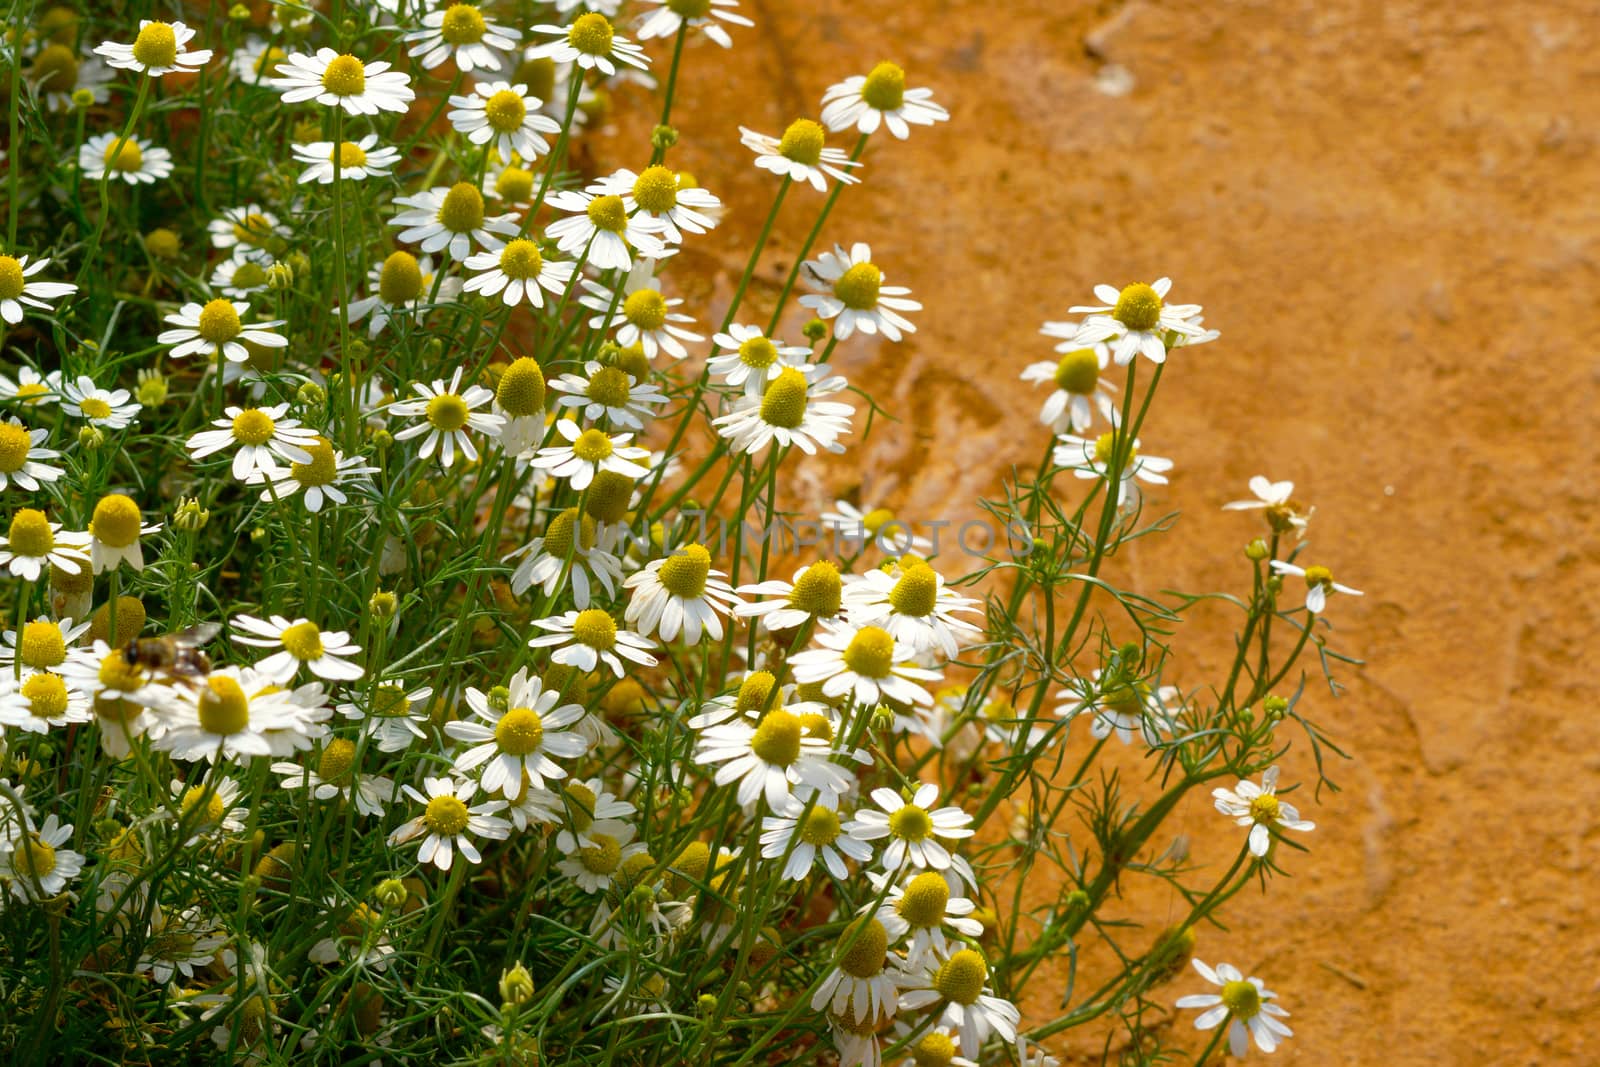 Chamomile flowers on the walkway in the vegetable garden.